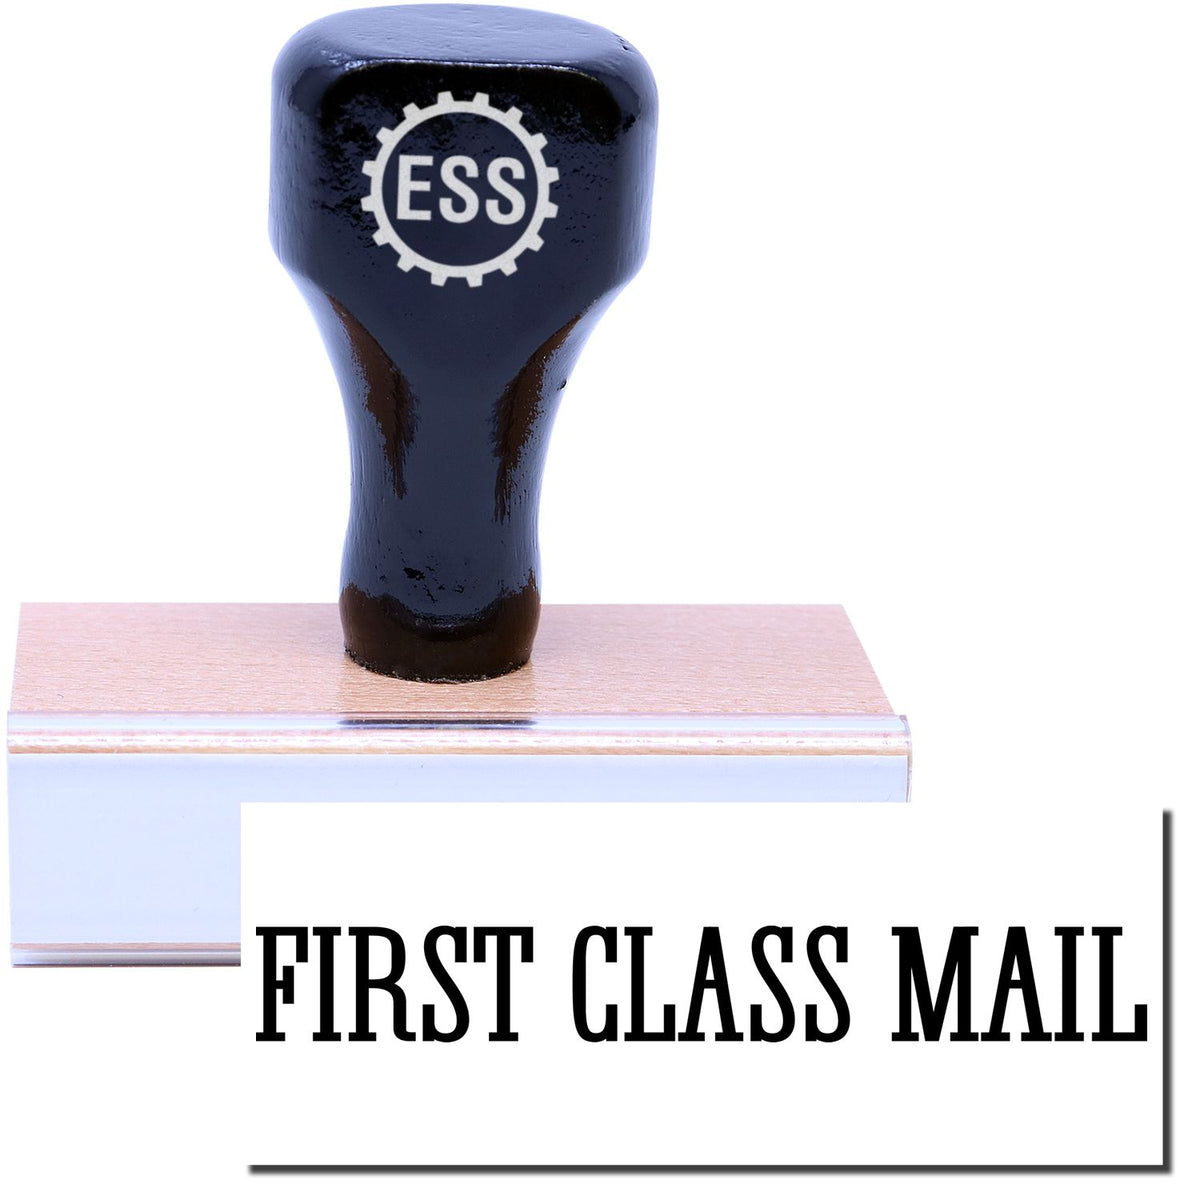 A stock office rubber stamp with a stamped image showing how the text &quot;FIRST CLASS MAIL&quot; in a large times font is displayed after stamping.